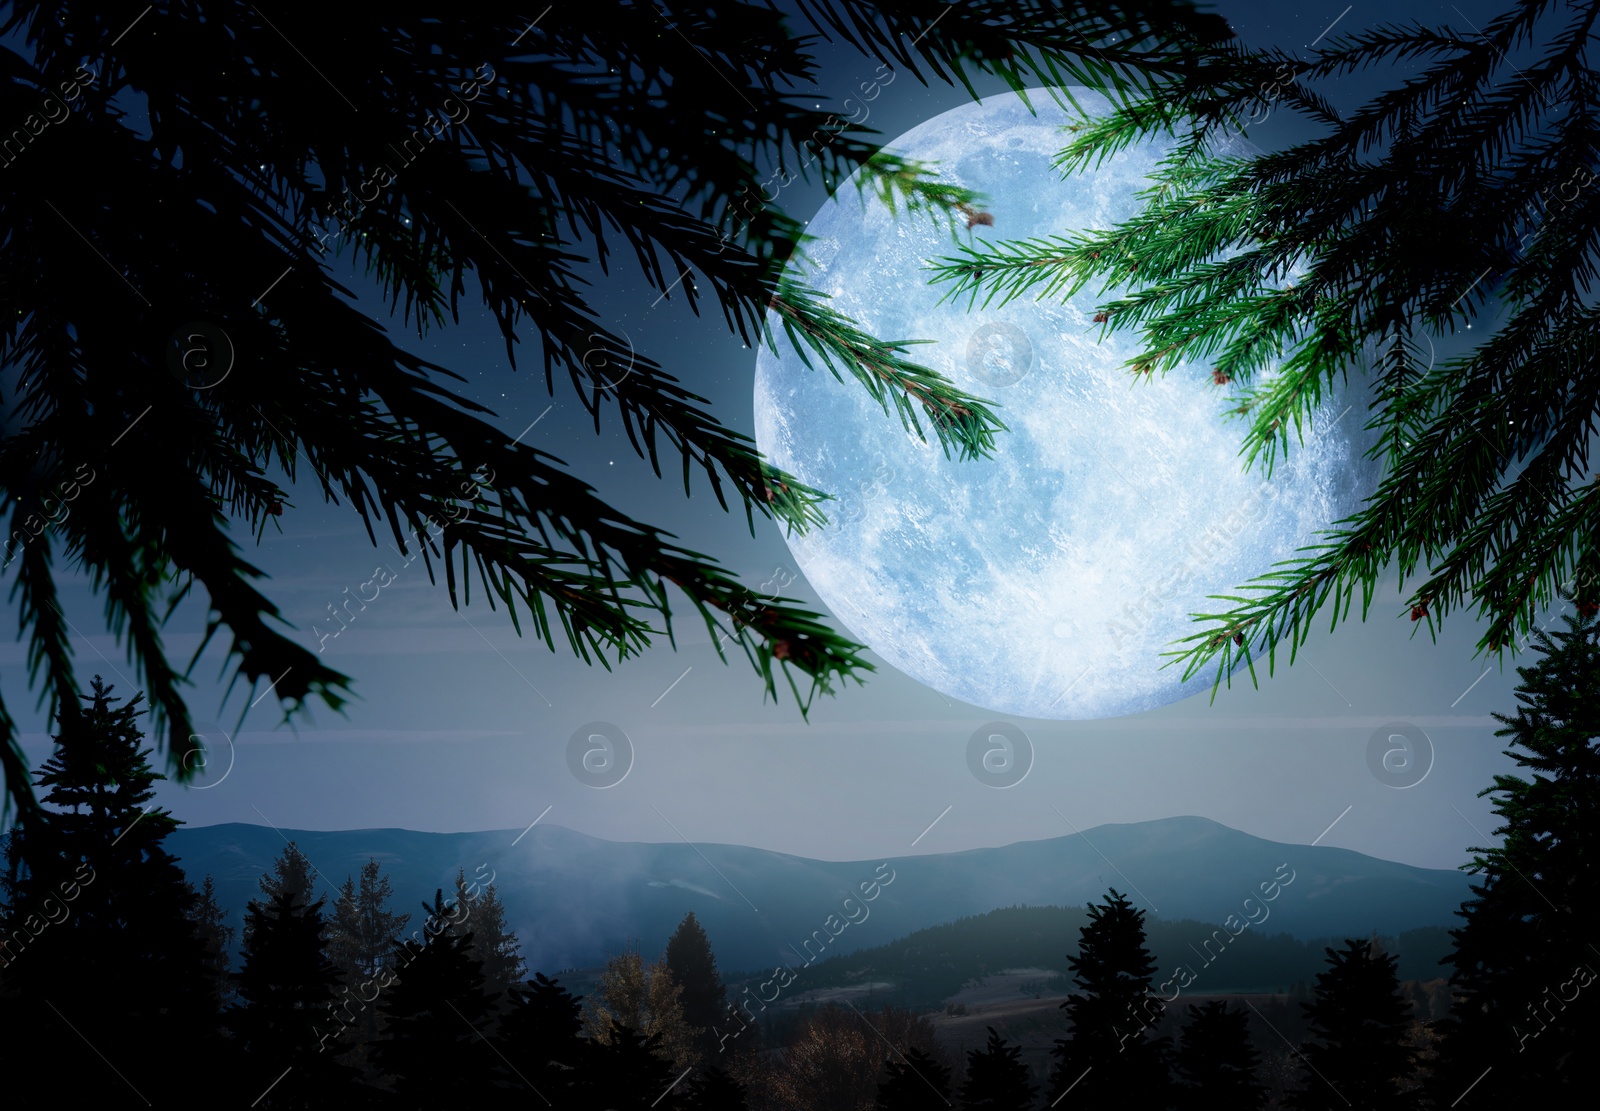 Image of Fantasy landscape. Full moon in starry sky over mountains, view through branches